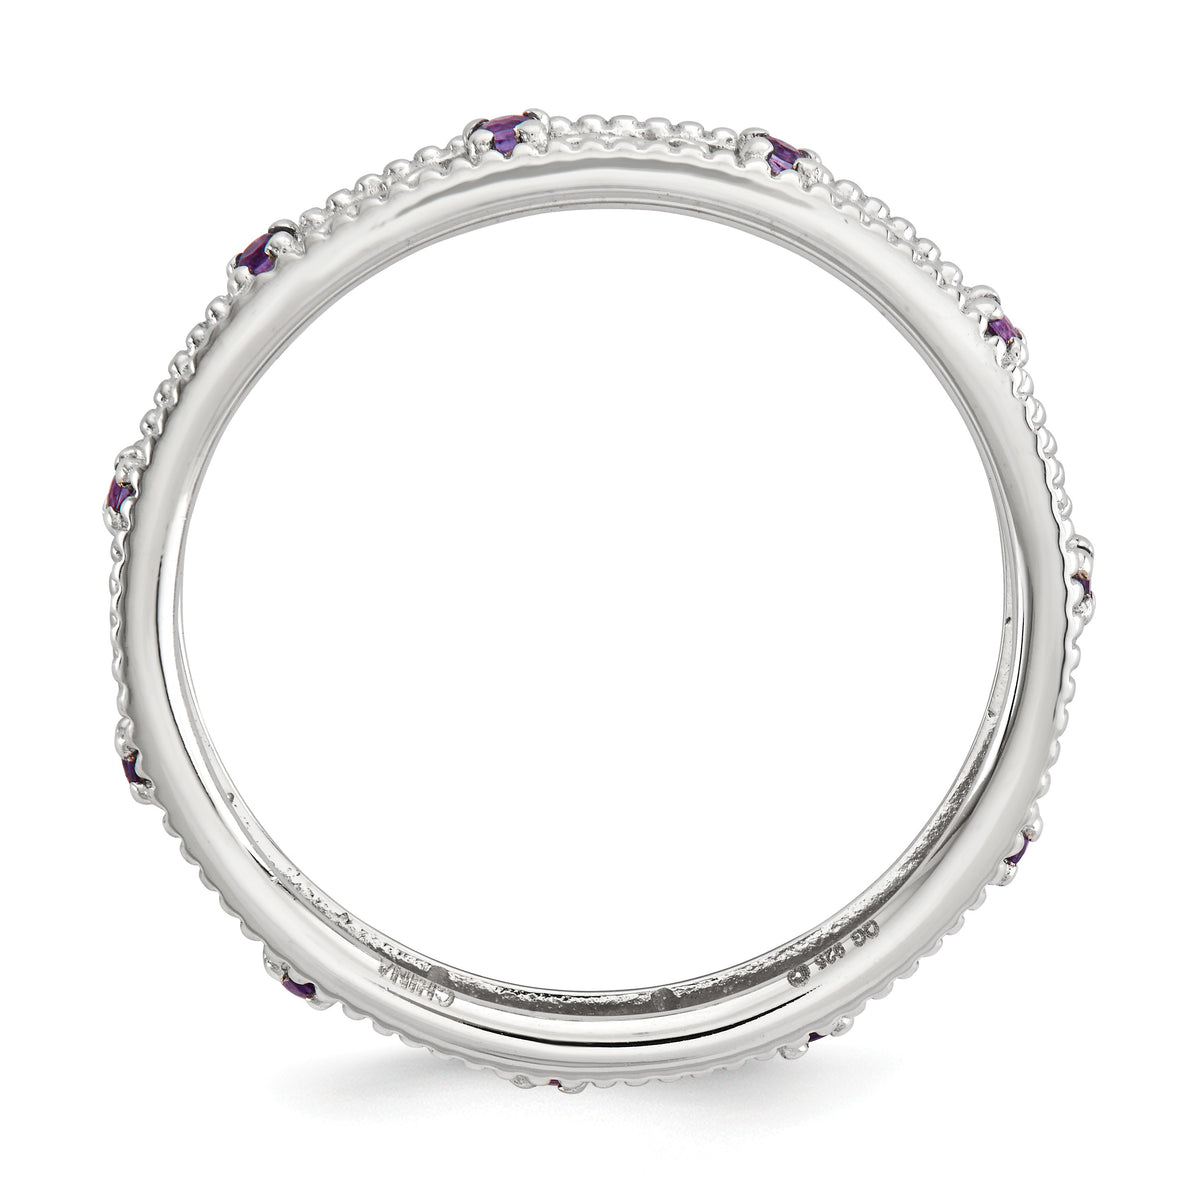 Alternate view of the 3mm Sterling Silver Stackable Expressions Amethyst Scroll Band by The Black Bow Jewelry Co.